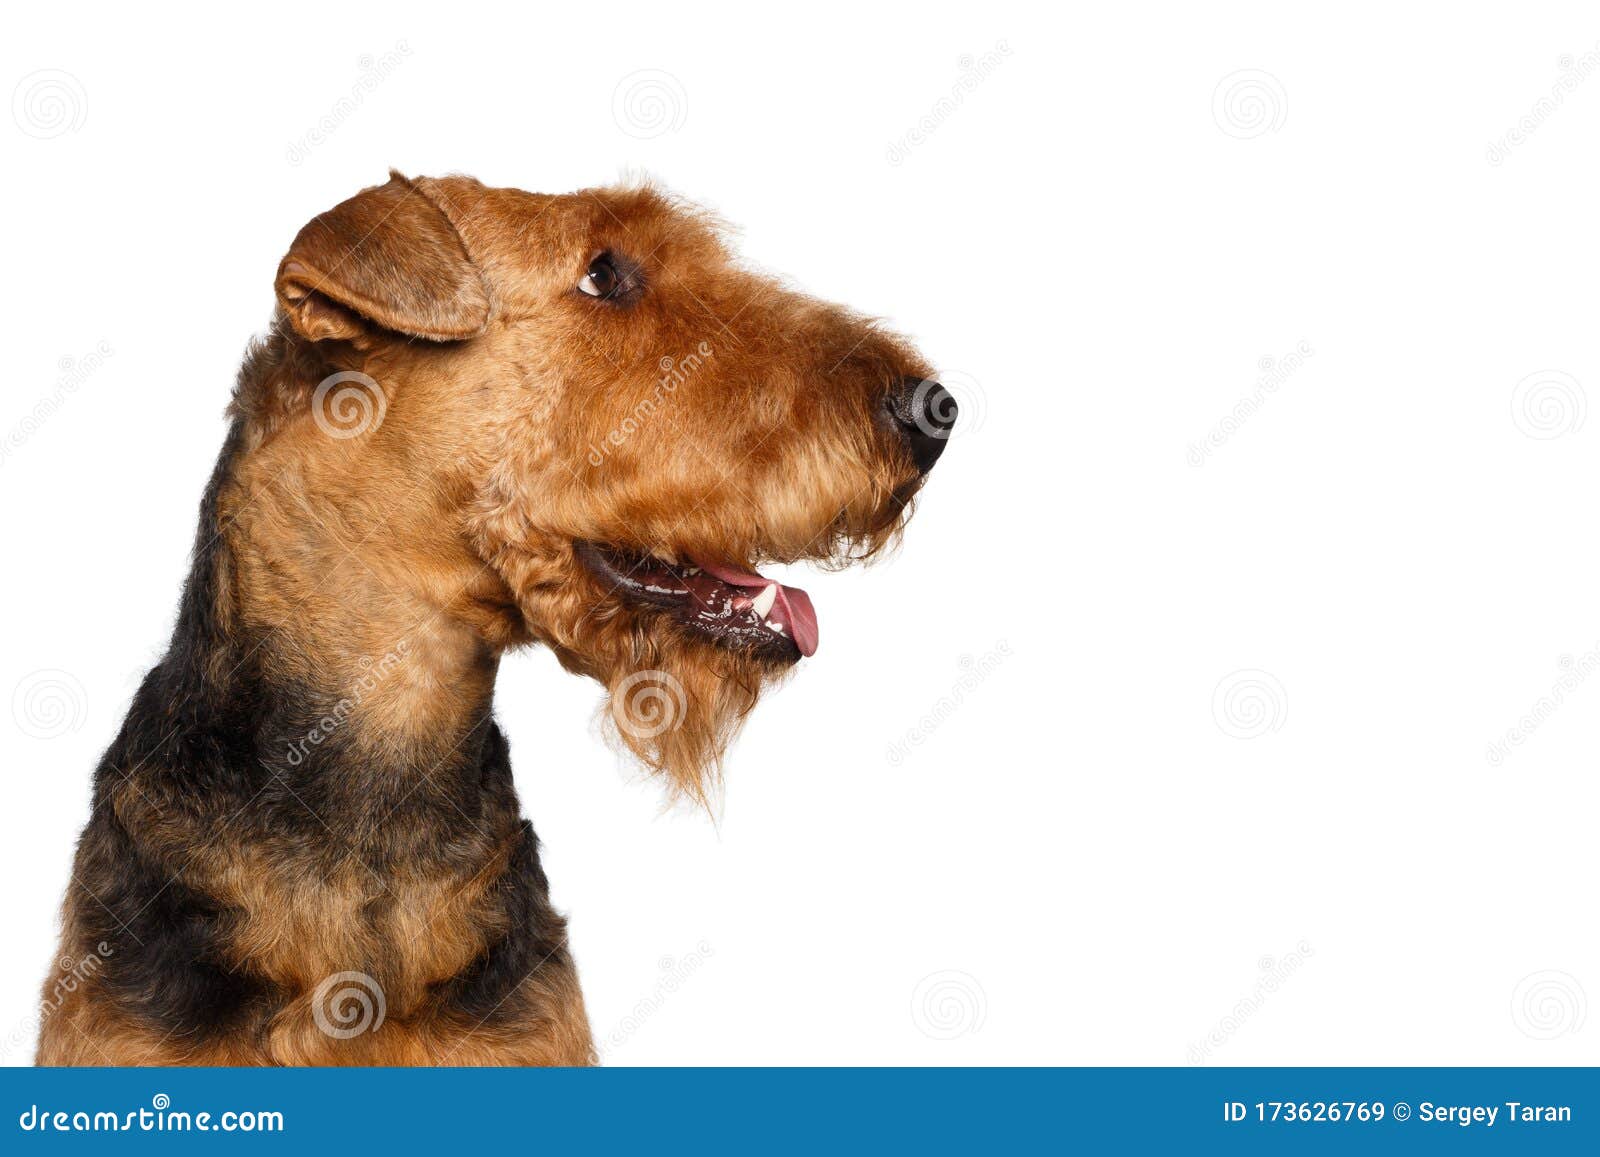 Airedale Terrier Dog On Isolated White Background Stock Image Image Of Cute Curly 173626769